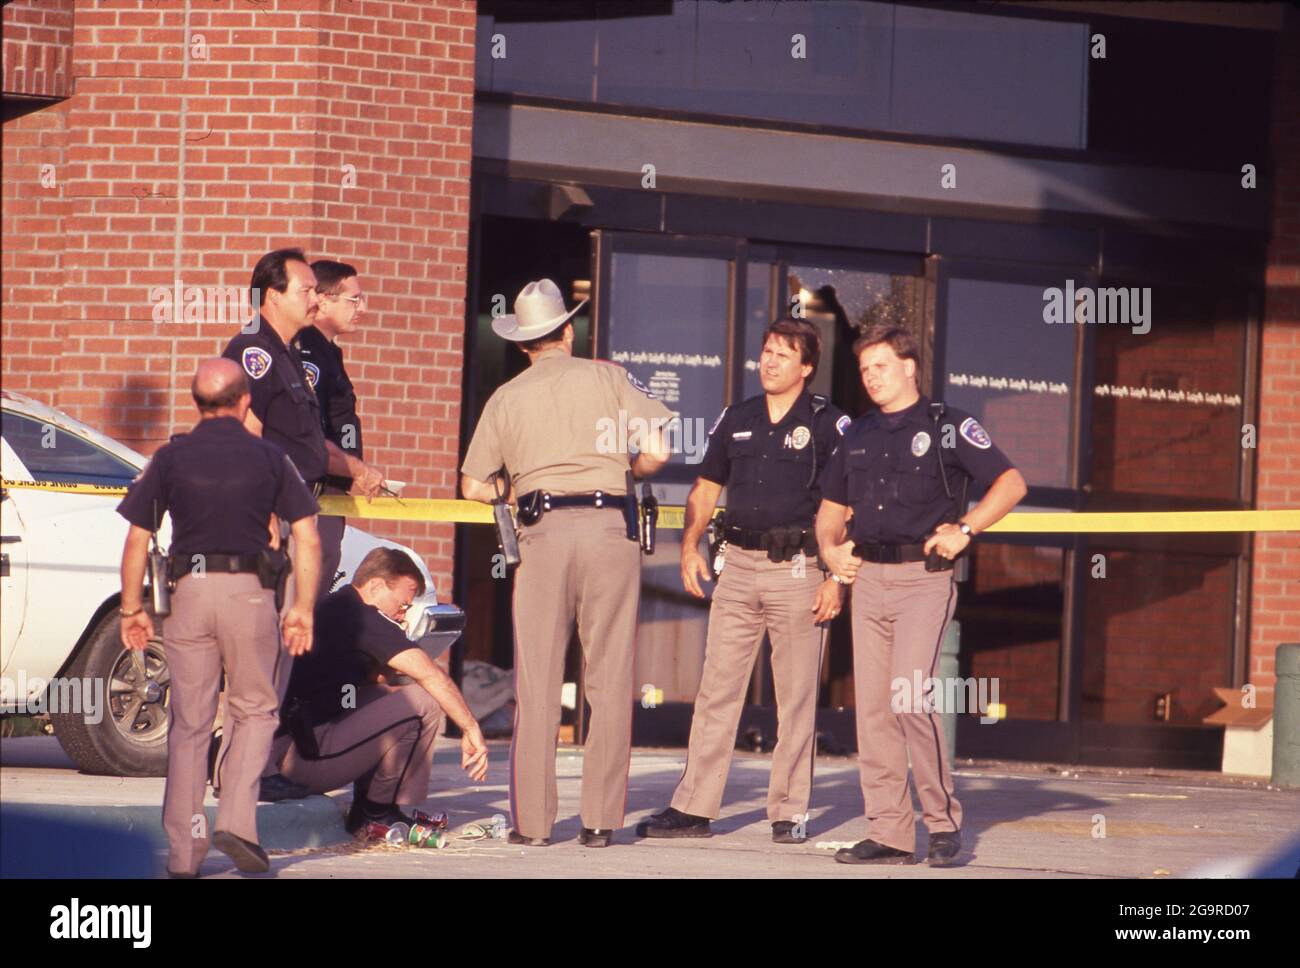 Terrorism and Disasters: ©1991 Aftermath of a mass shooting at Luby's Cafeteria in Killeen, Texas on October 16, 1991 where 35-year old George Hennard crashed a pickup into the eatery and shot 23 people to death before killing himself. Stock Photo